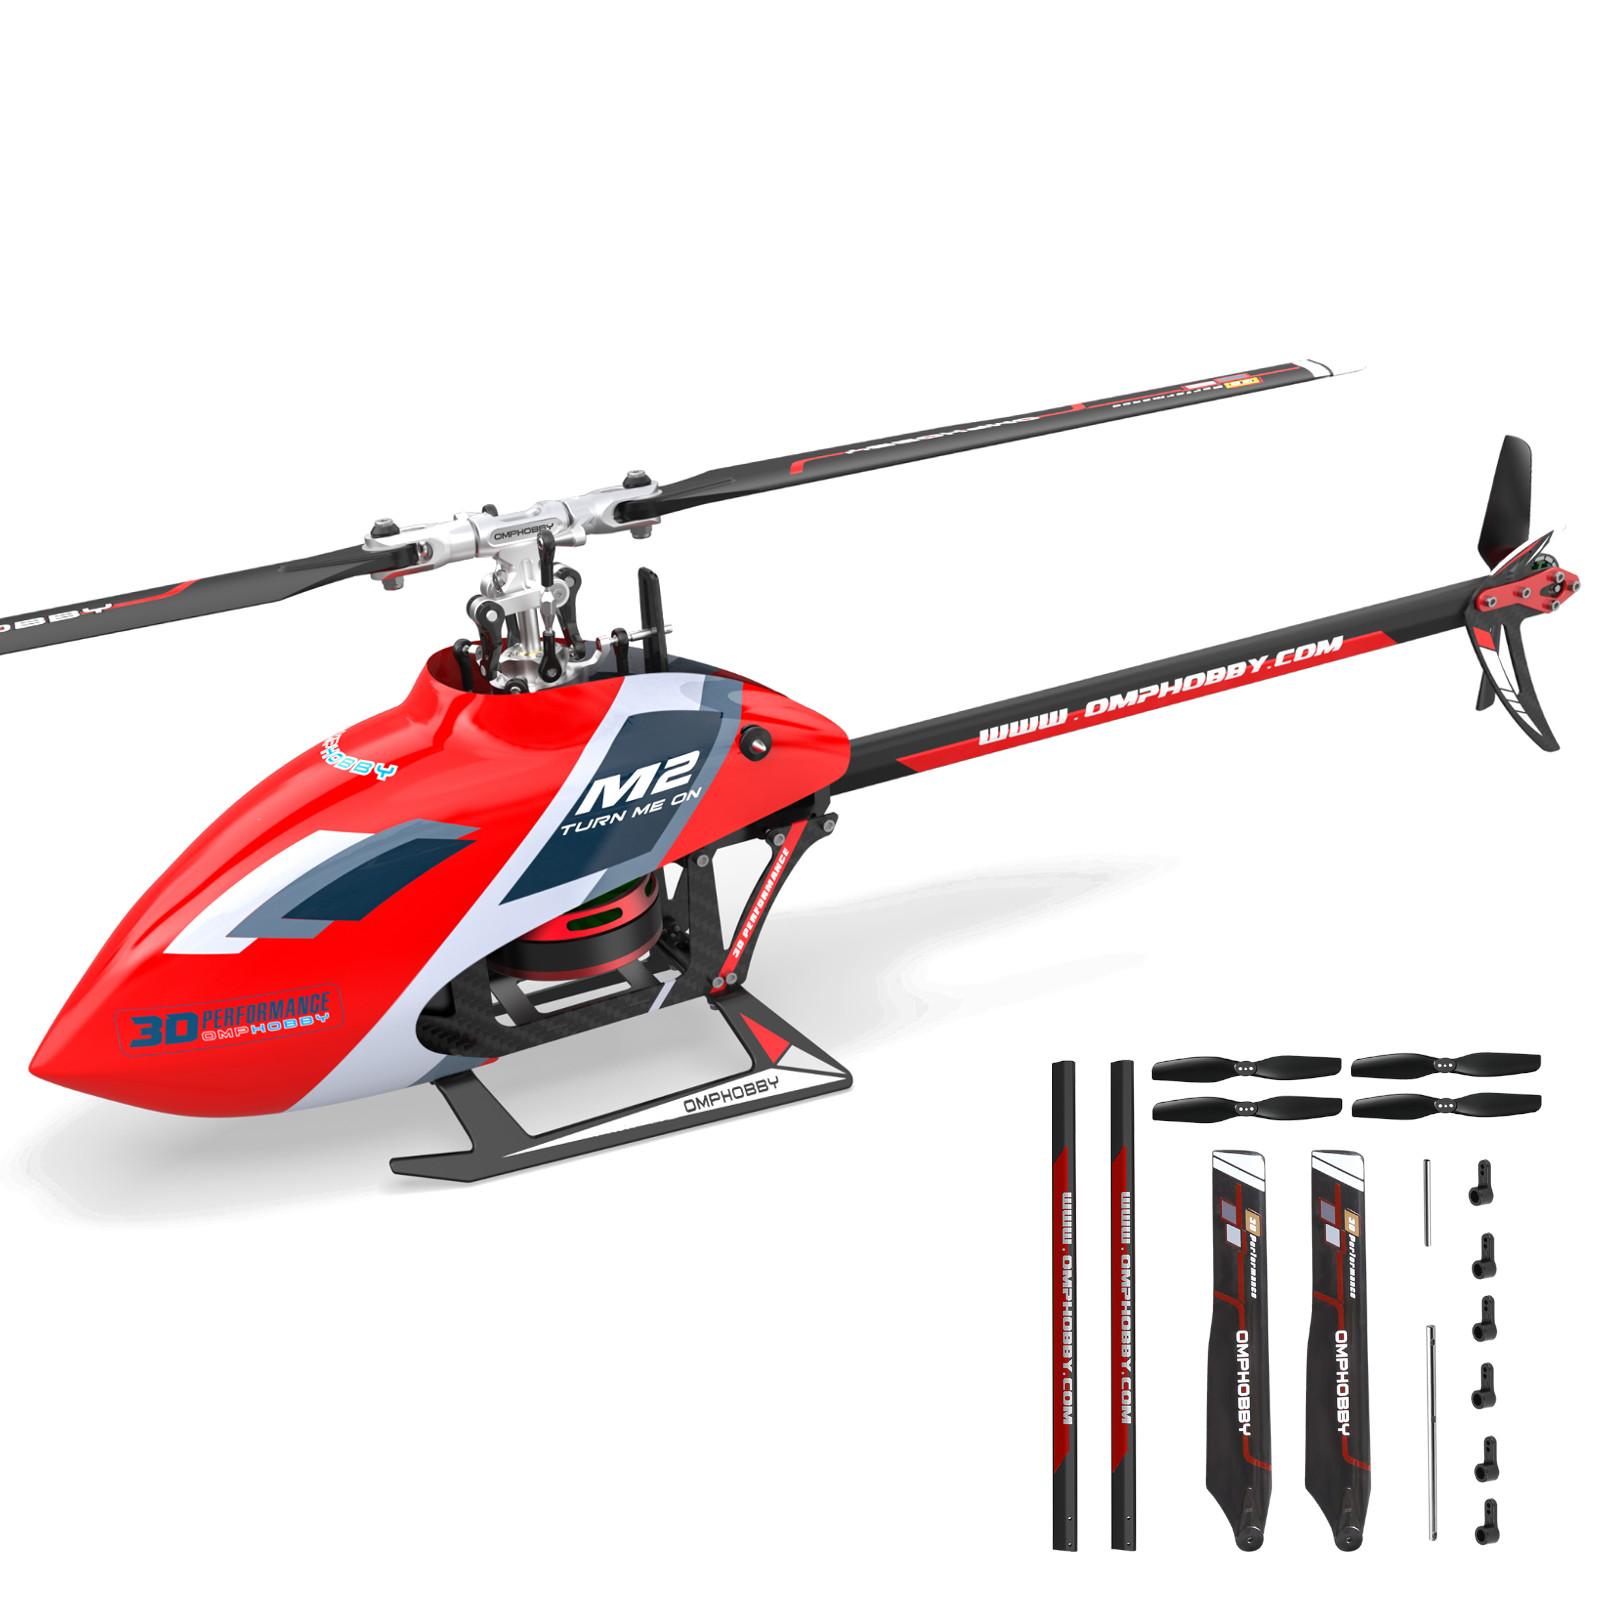 M2 Rc Helicopter: M2 RC Helicopter: Price, Availability, and Where to Buy